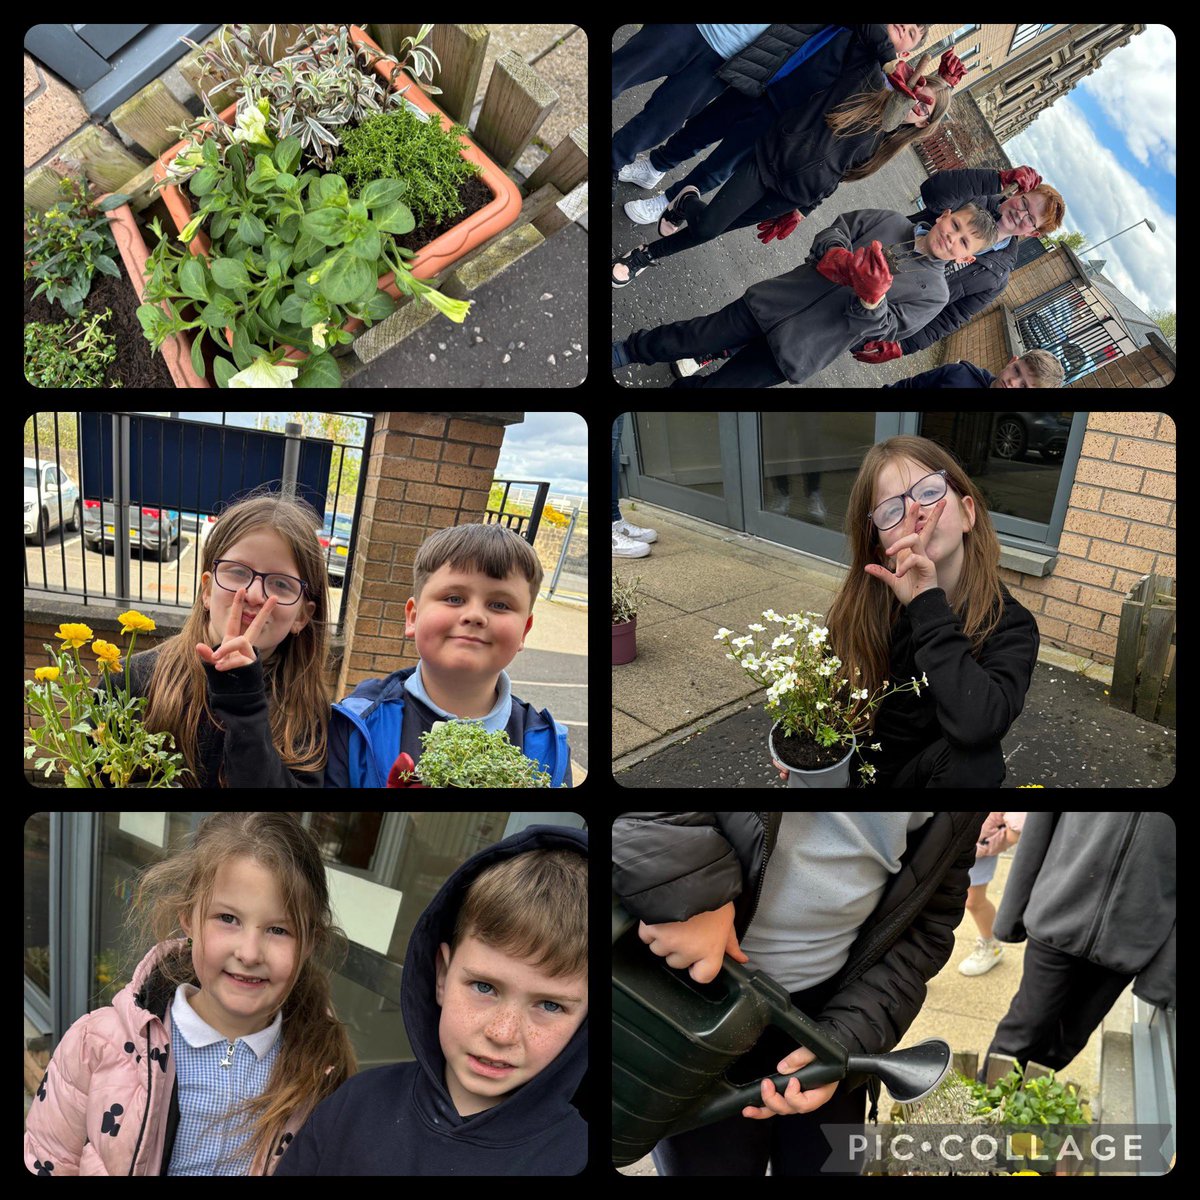 Feel Good Thursday took the opportunity of the ☀️ to plant some plants and brighten our front entrance. 🌺 @EducationSLC @slcHealthy @SLC_RAiSE #TeamBurgh #DREAMBigatBurgh